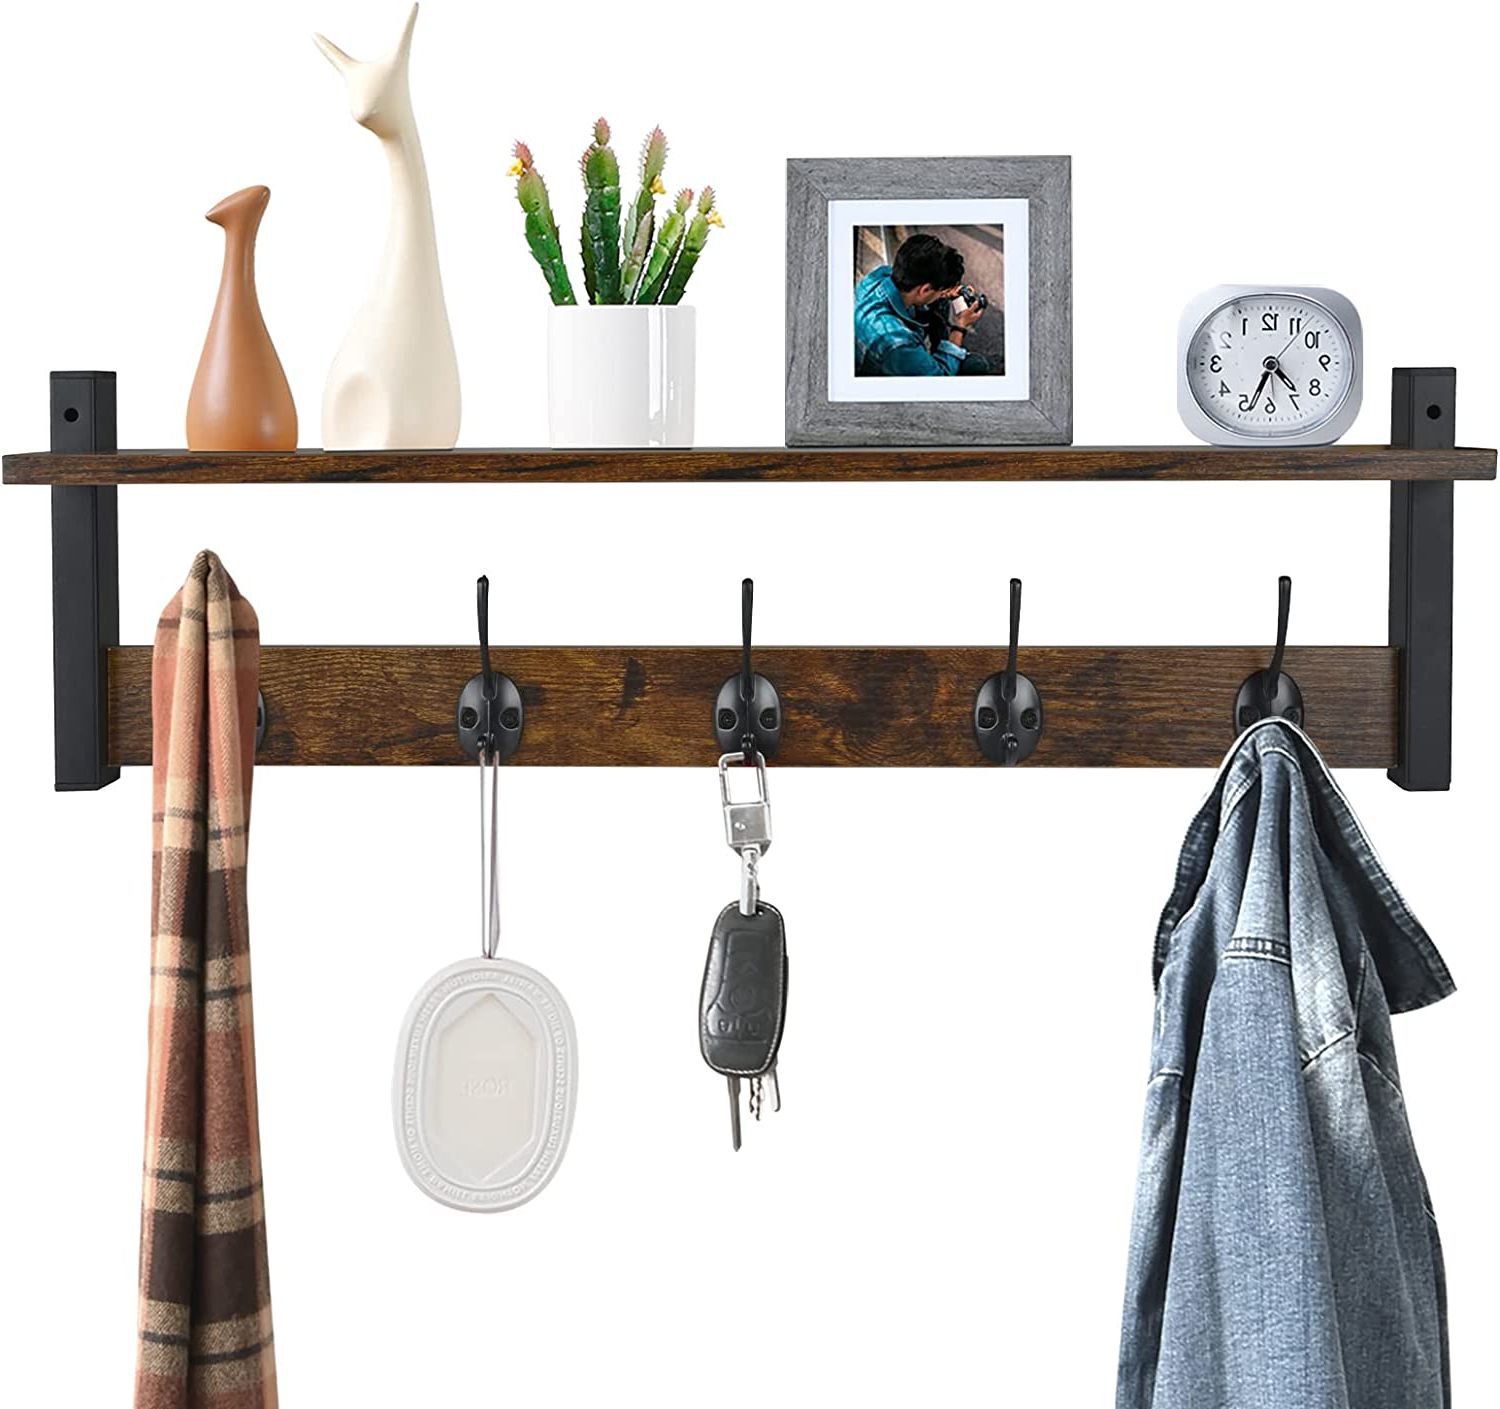 Thalha Wall Mounted Storage Rack with Upper Shelf, Wire Baskets, and Hooks 17 Stories Color: Rustic Brown